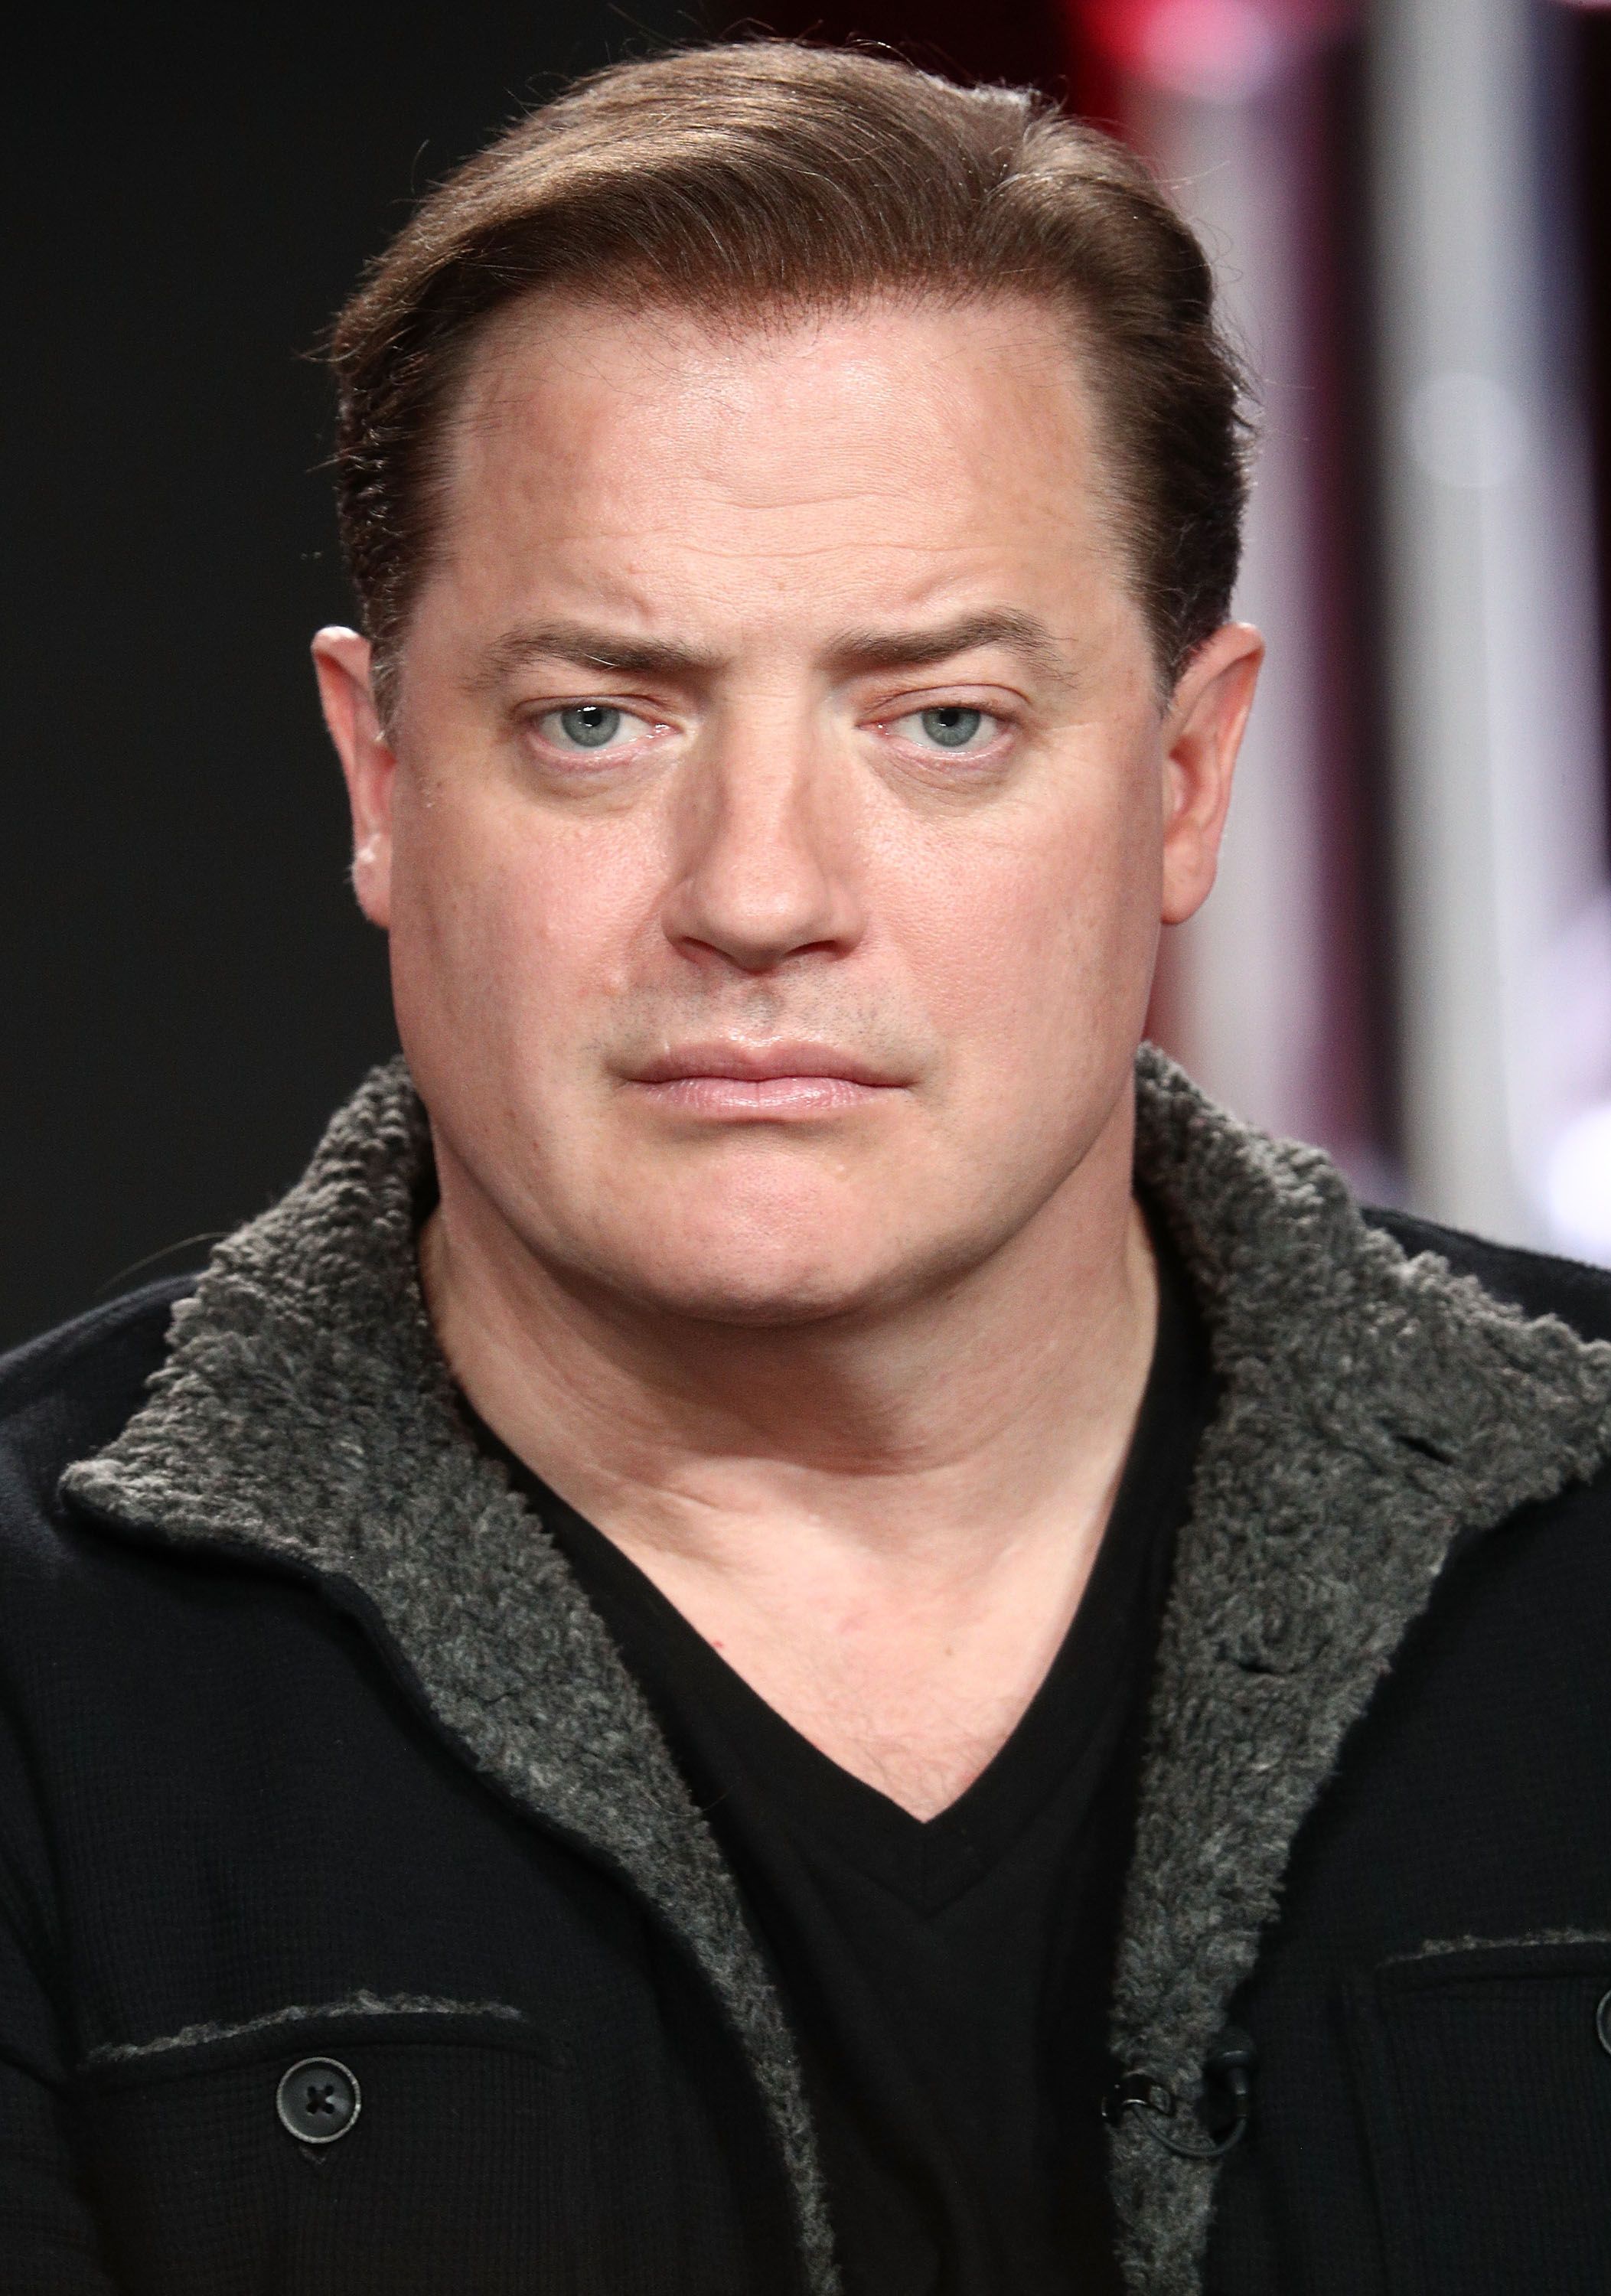  Brendan Fraser at the 2018 Winter Television Critics Association Press Tour at The Langham Huntington on January 11, 2018, in Pasadena, California. | Source: Getty Images